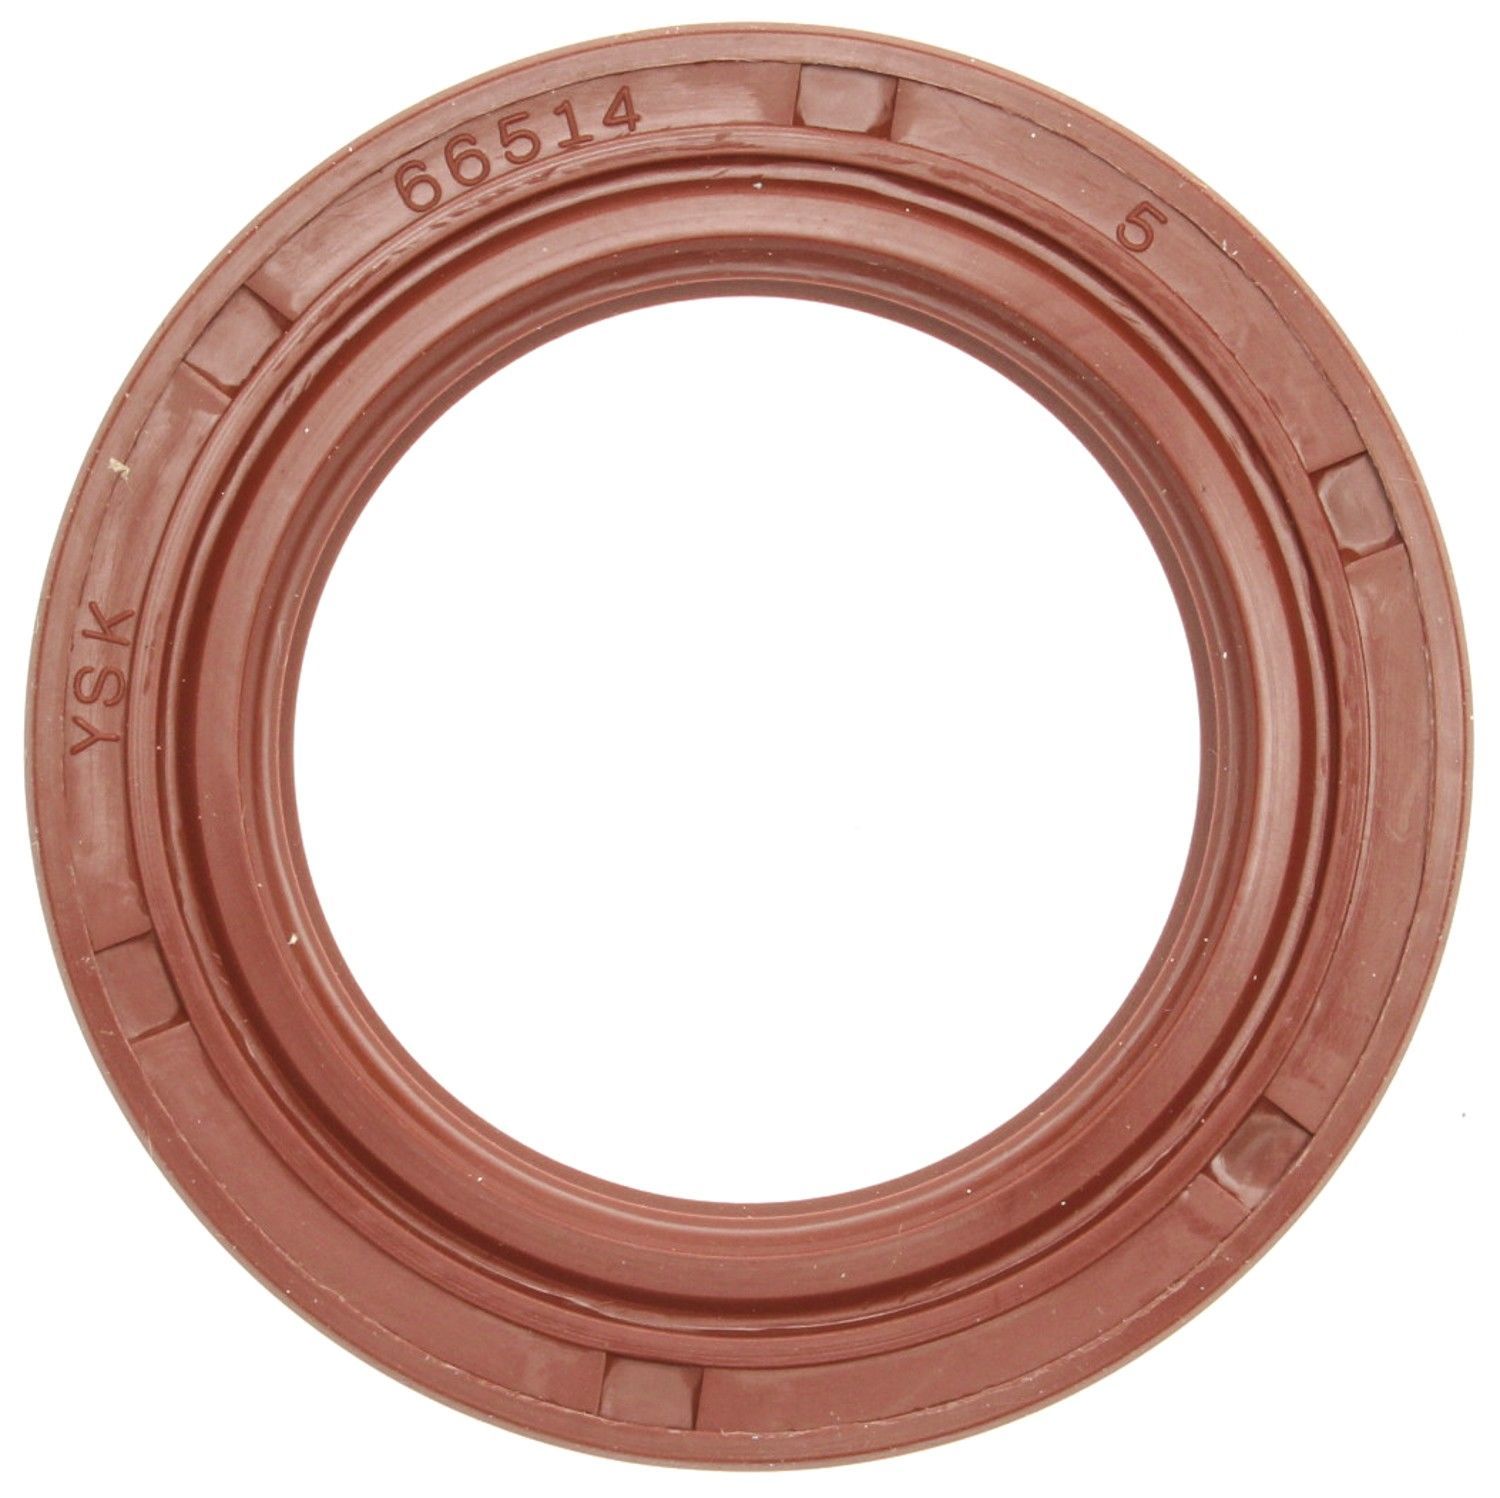 MAHLE ORIGINAL - Engine Timing Cover Seal - MHL 66514